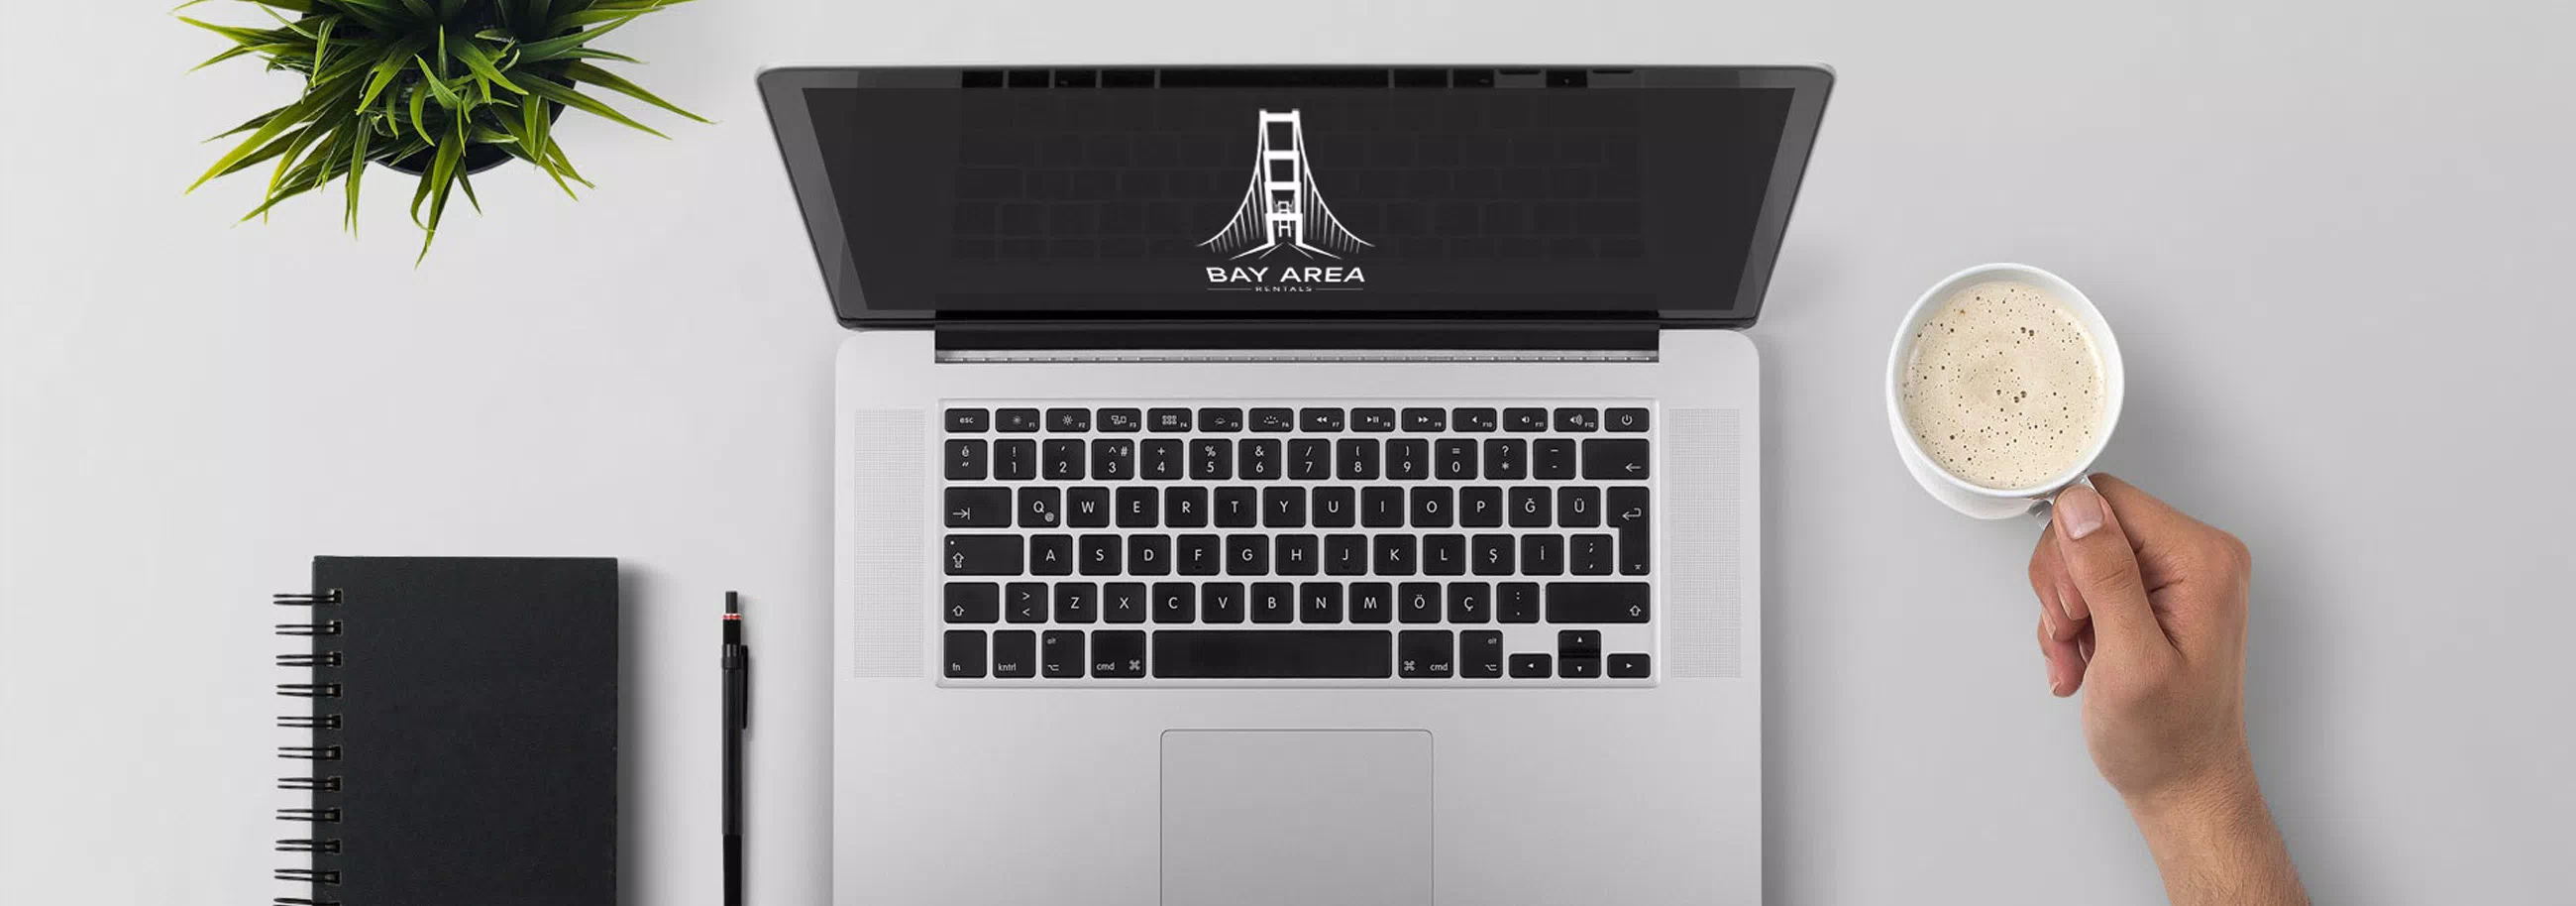 a laptop with Bay Area logo on the screen